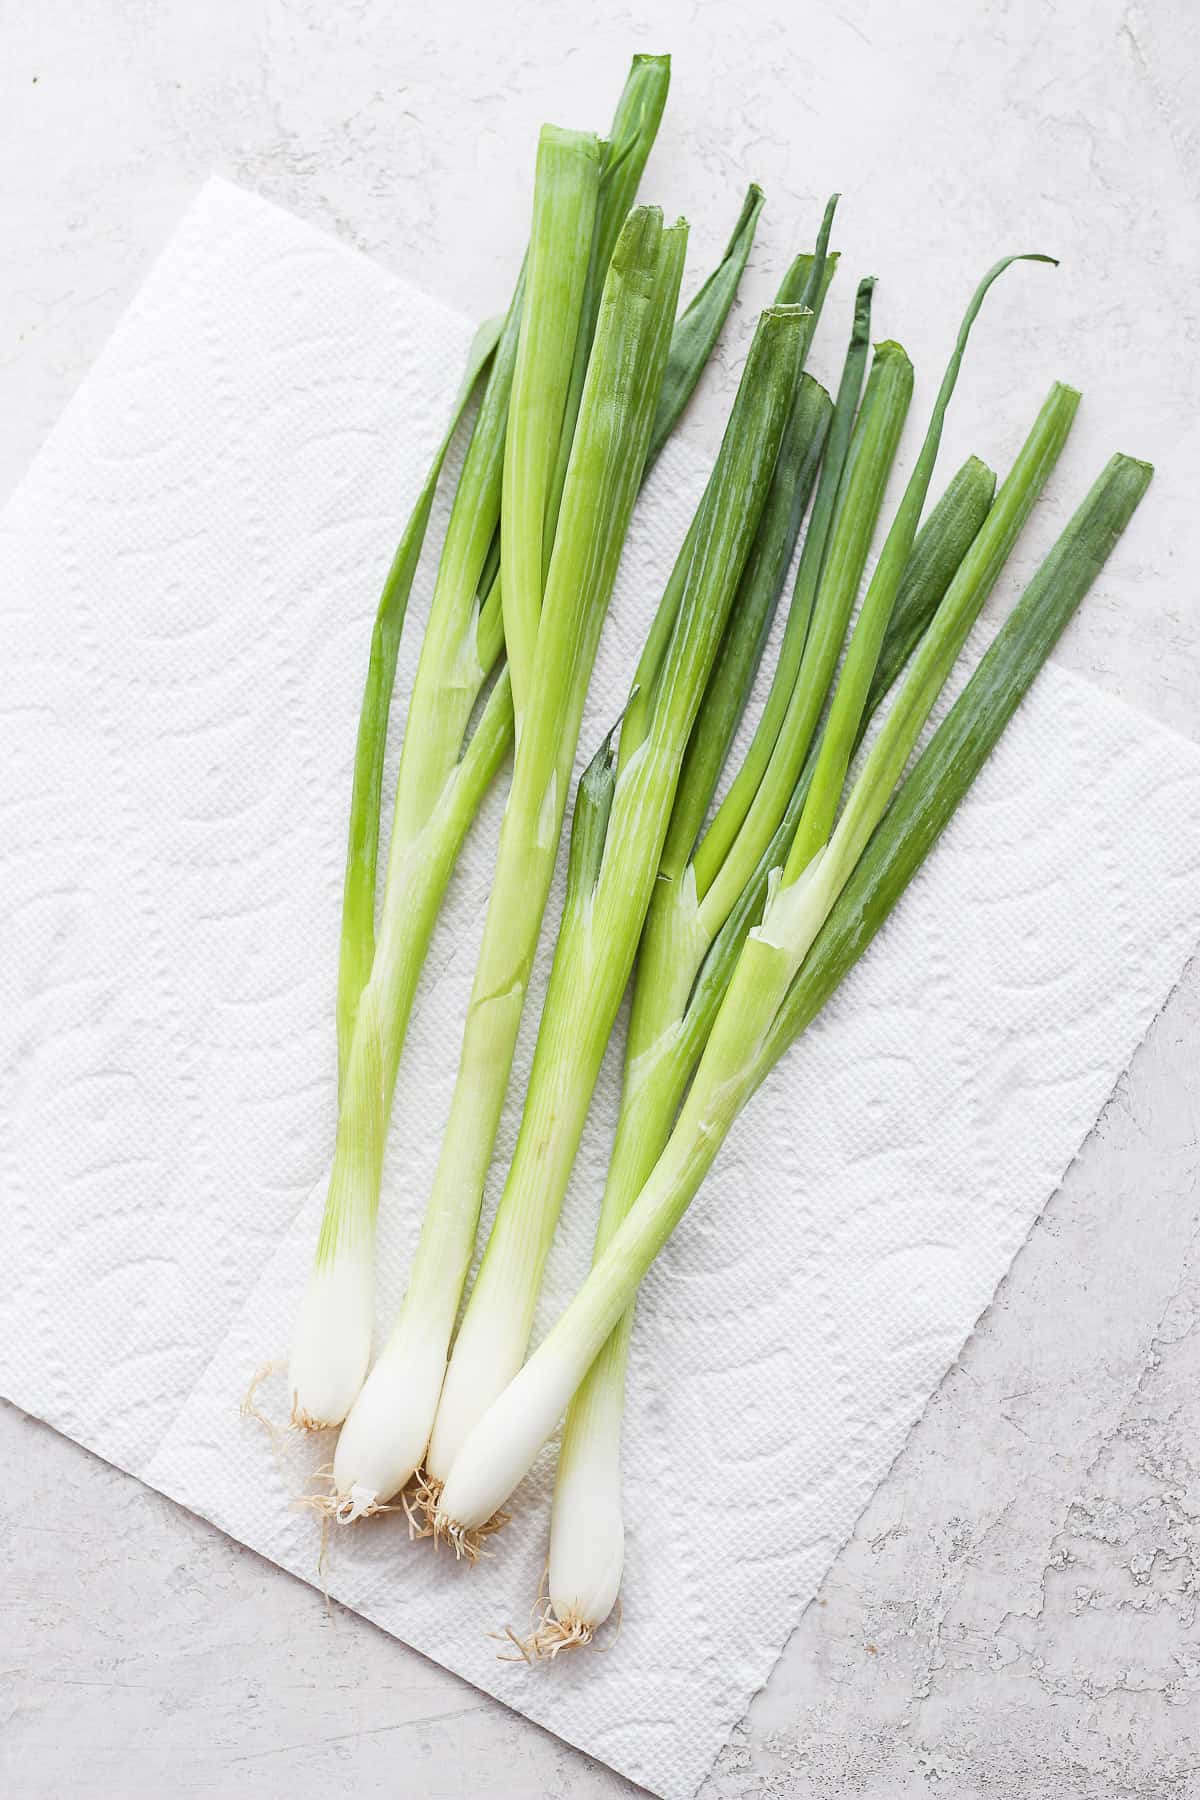 Green onions on paper towel to dry before chopping